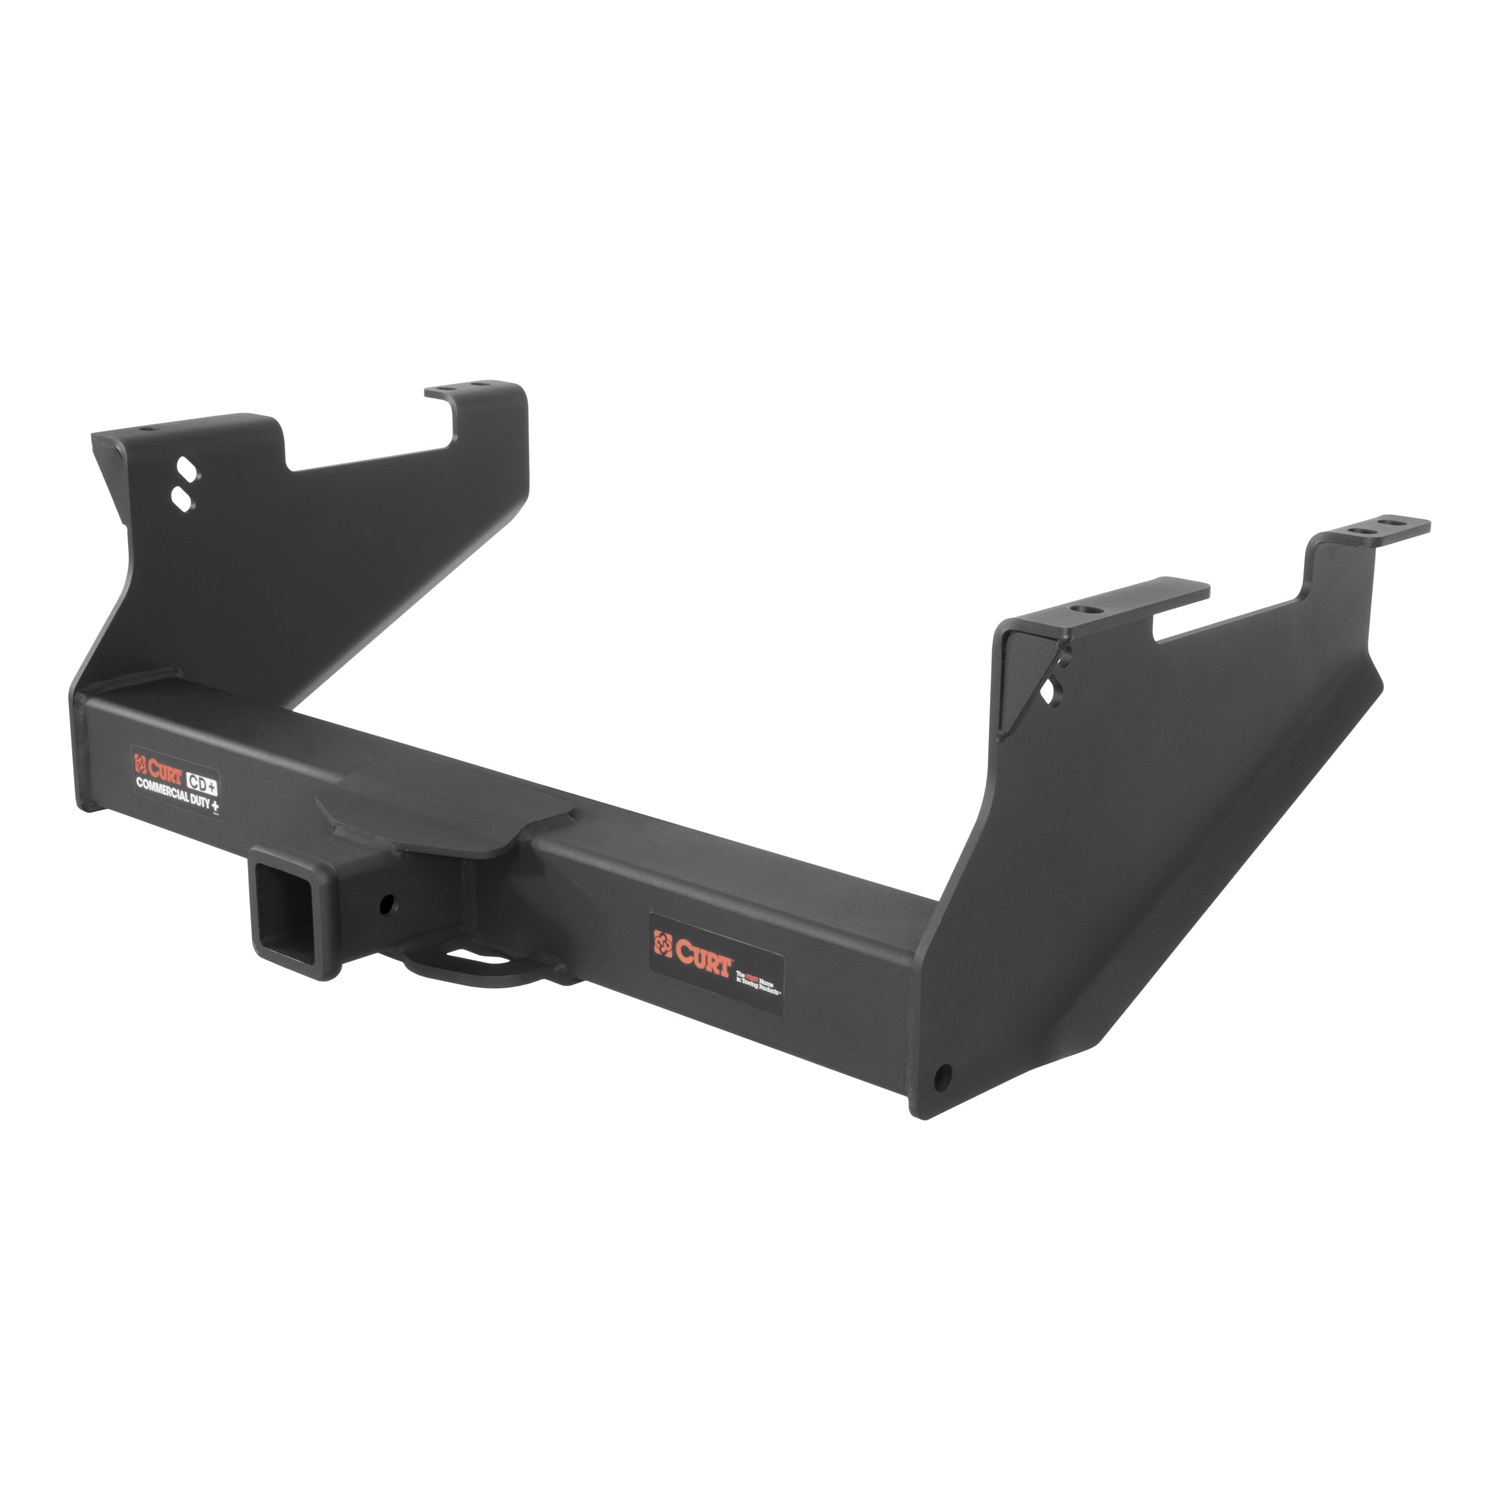 CURT Manufacturing CURT Manufacturing 15808 Class V; 2.5 in. Commercial Duty Hitch 14-15 Fits 3500